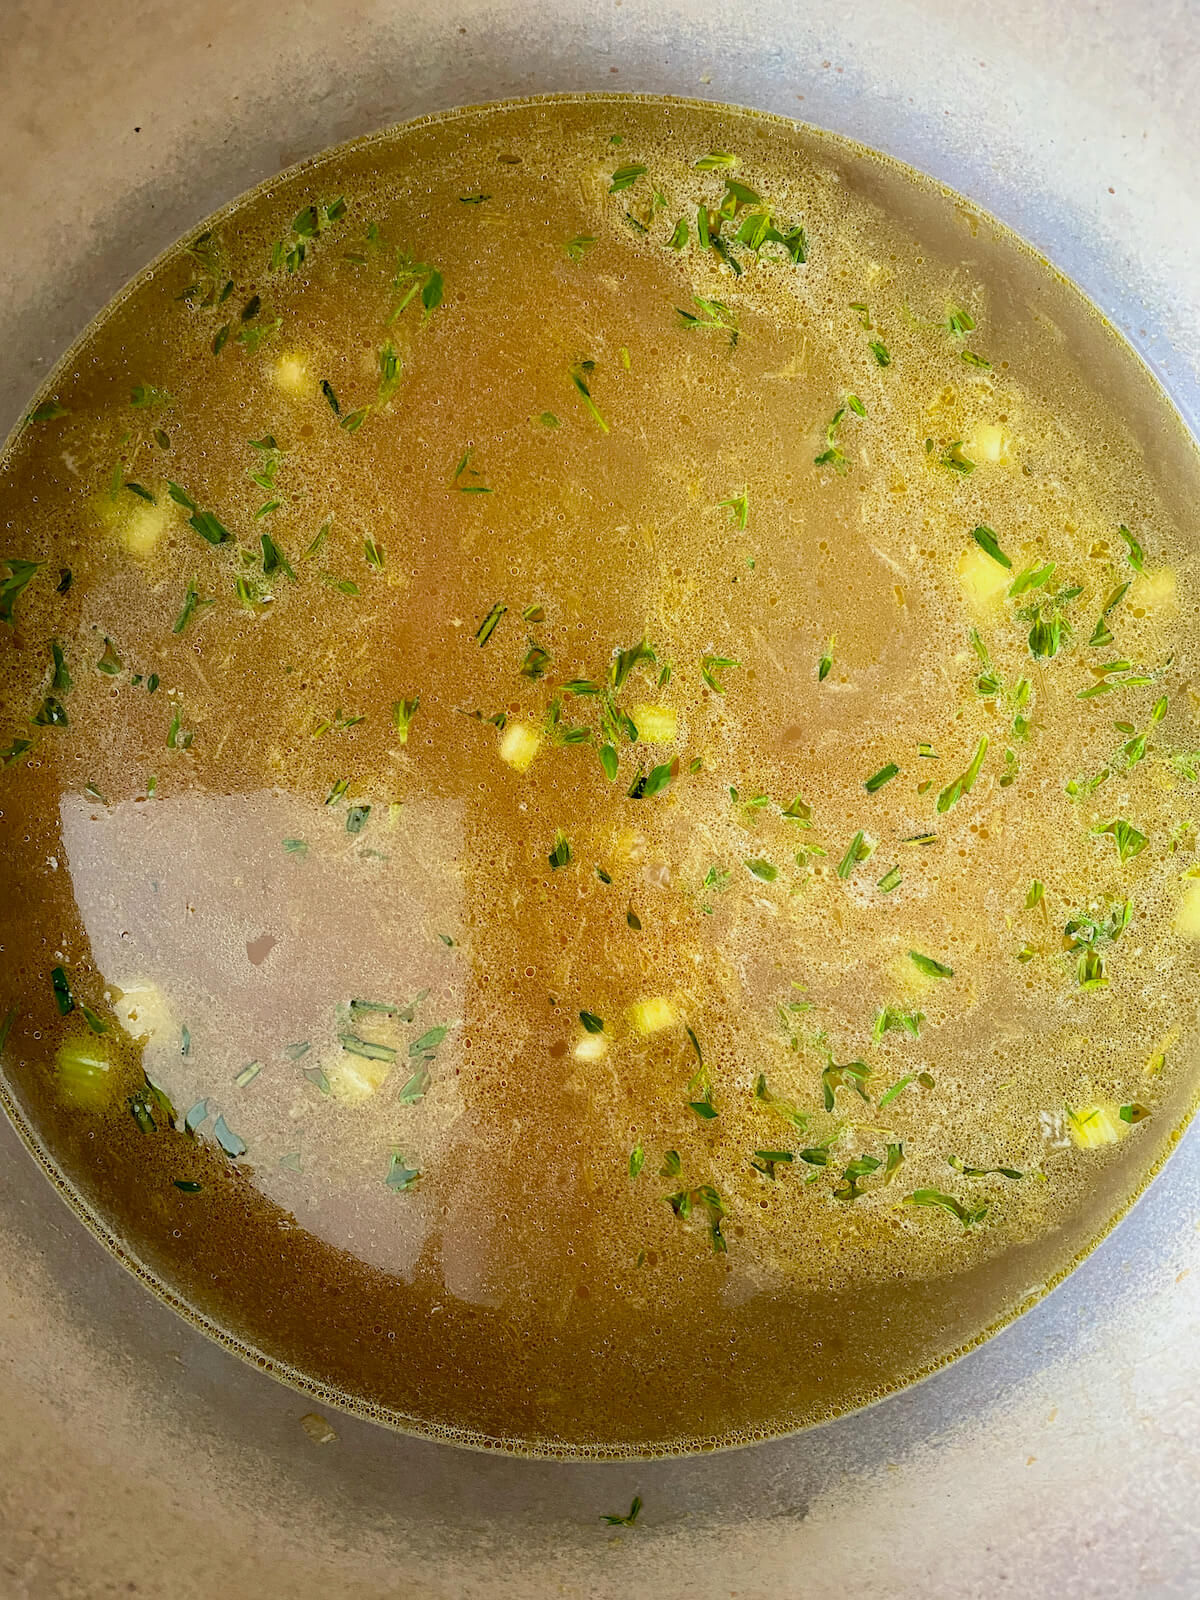 Chicken stock, vegetables, and herbs simmering in a Dutch oven.